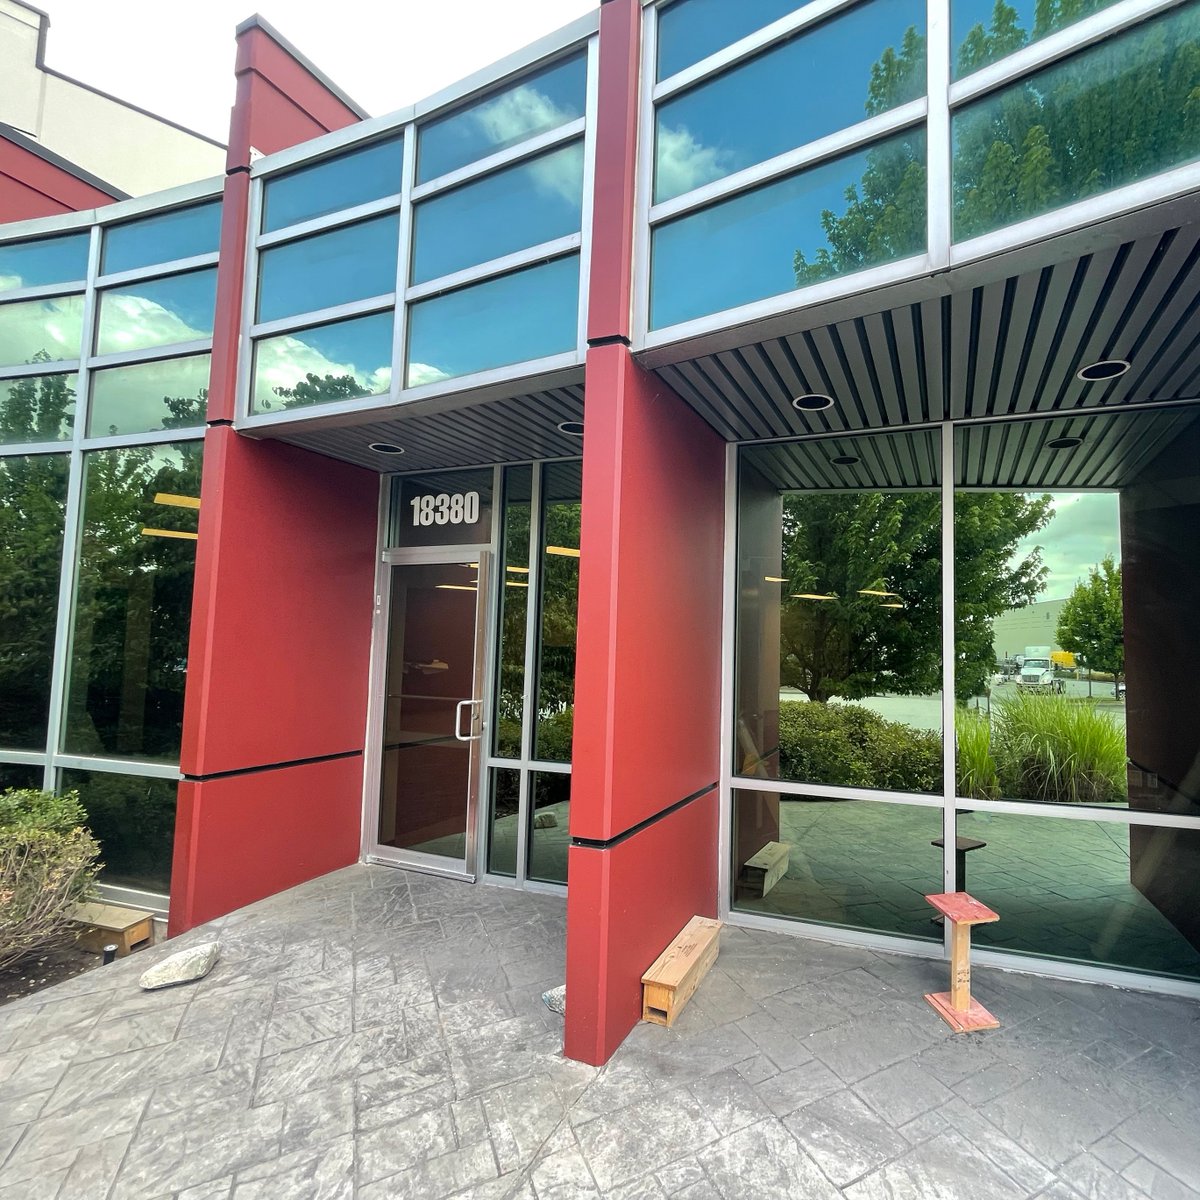 CDS Group of Companies is a leader in supply chain & logistics. CDS is based out of #Richmond, British Columbia, & in 2021, it identified the need to renovate its existing office space to better serve the needs of the company & its people. ow.ly/nOQo50OqBlG #brightenlives